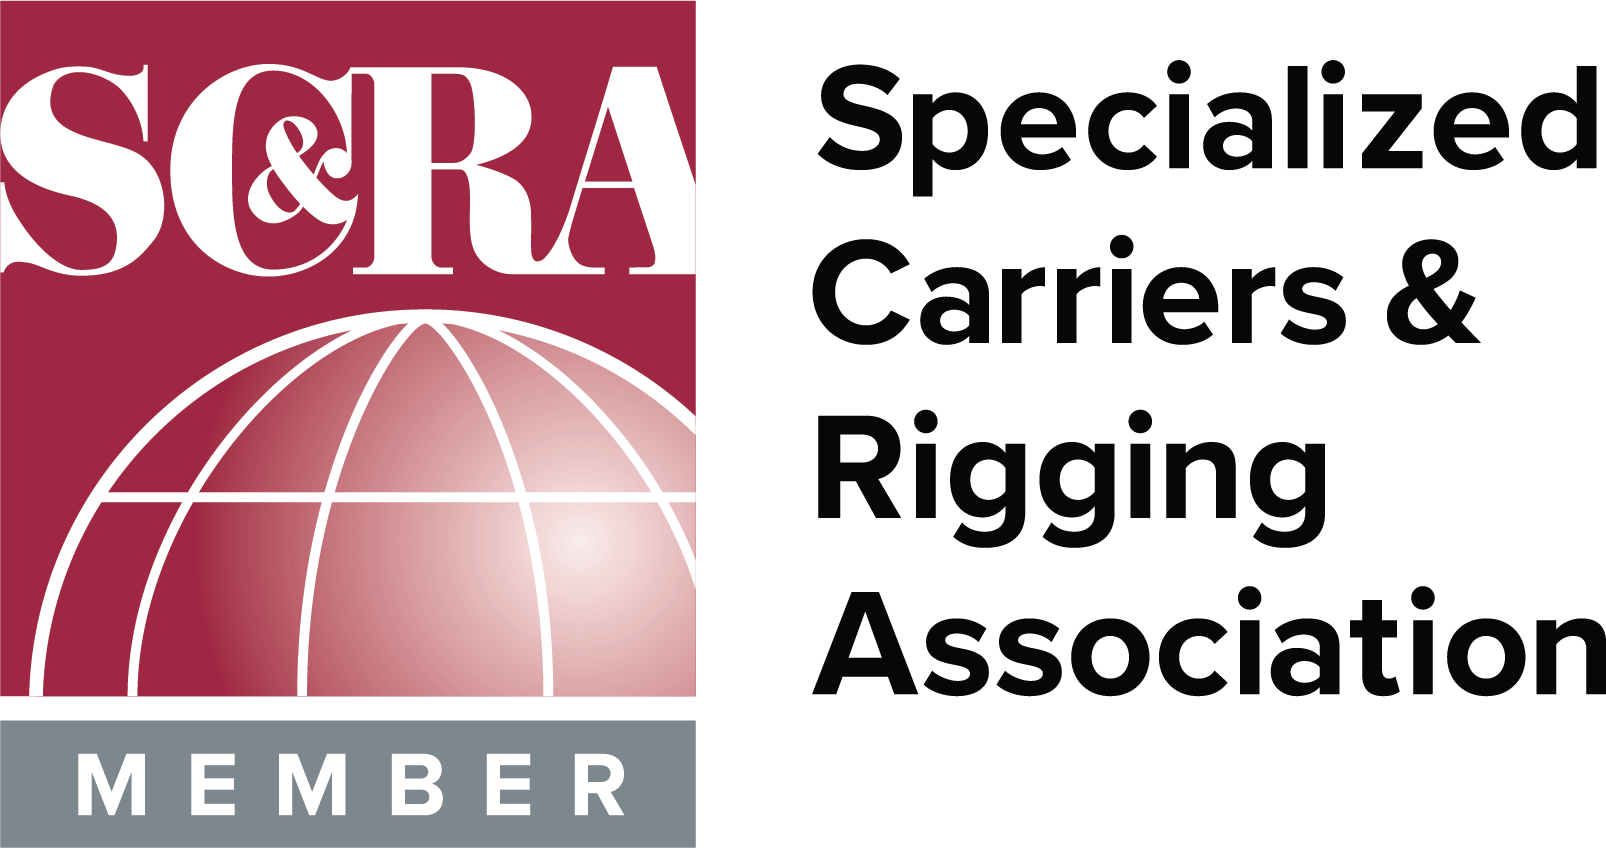 specialized carriers & rigging association